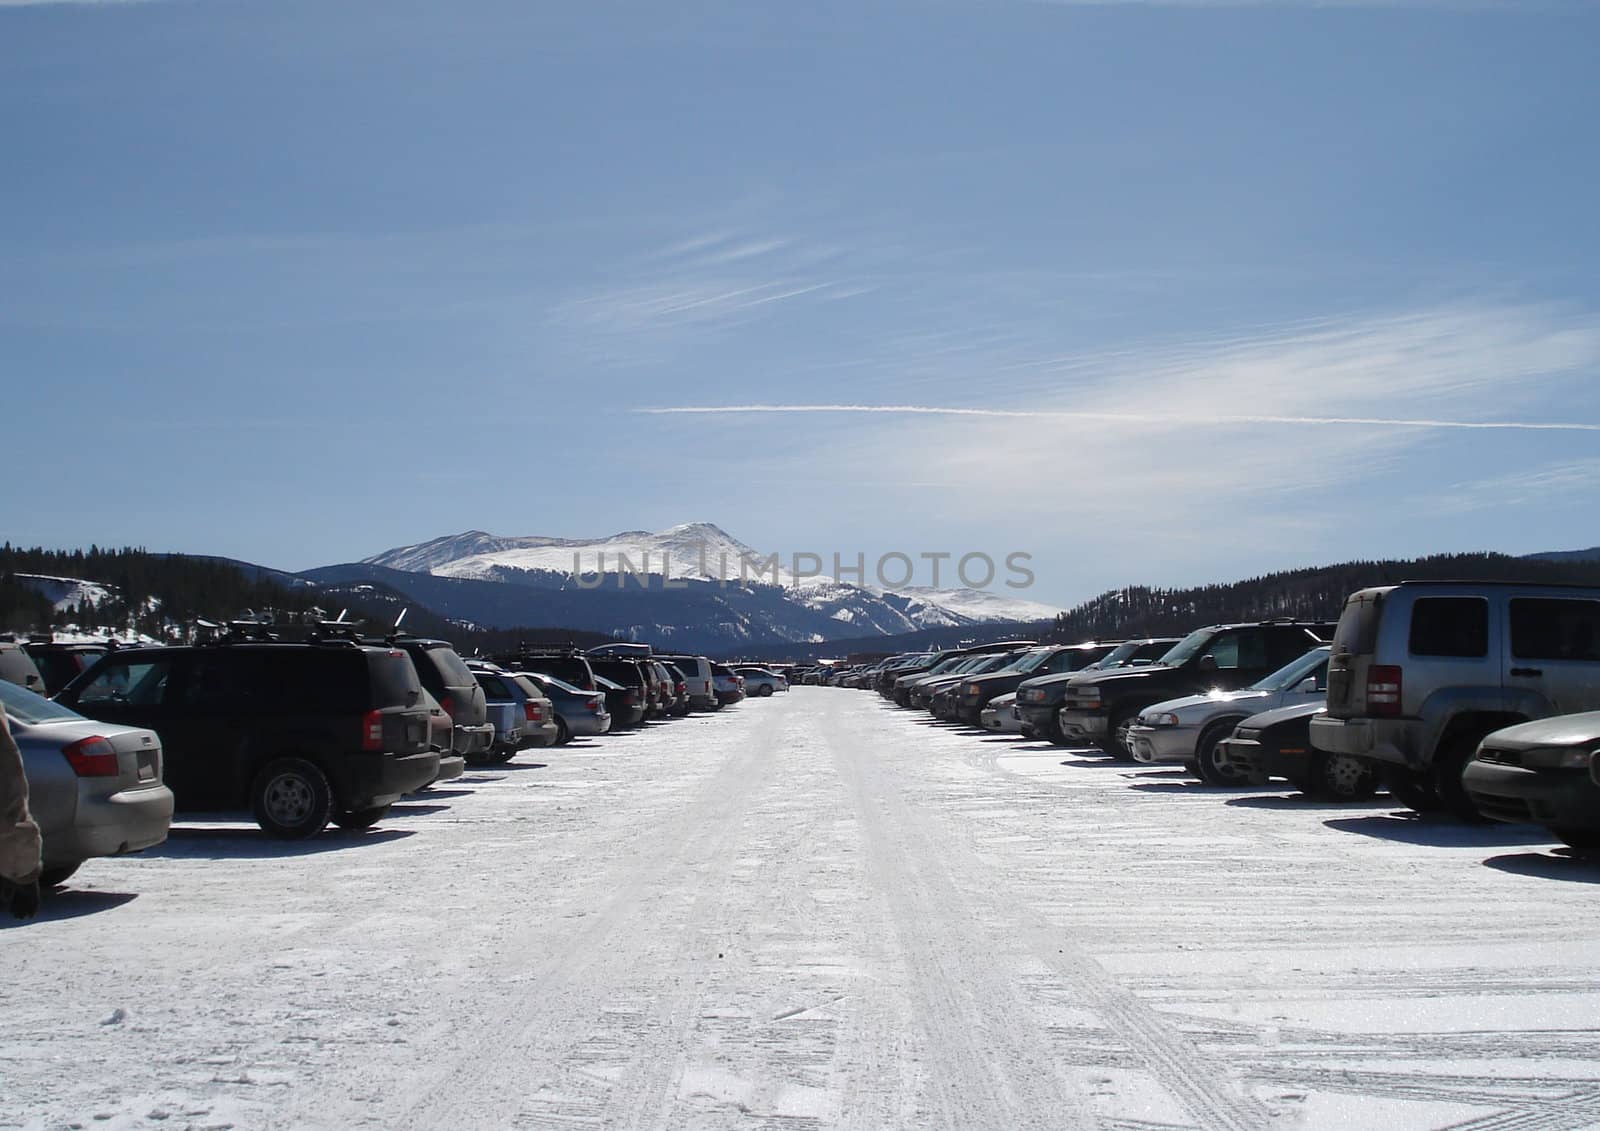 The parking lot for a Colorado ski resort extends out into the horizon.  